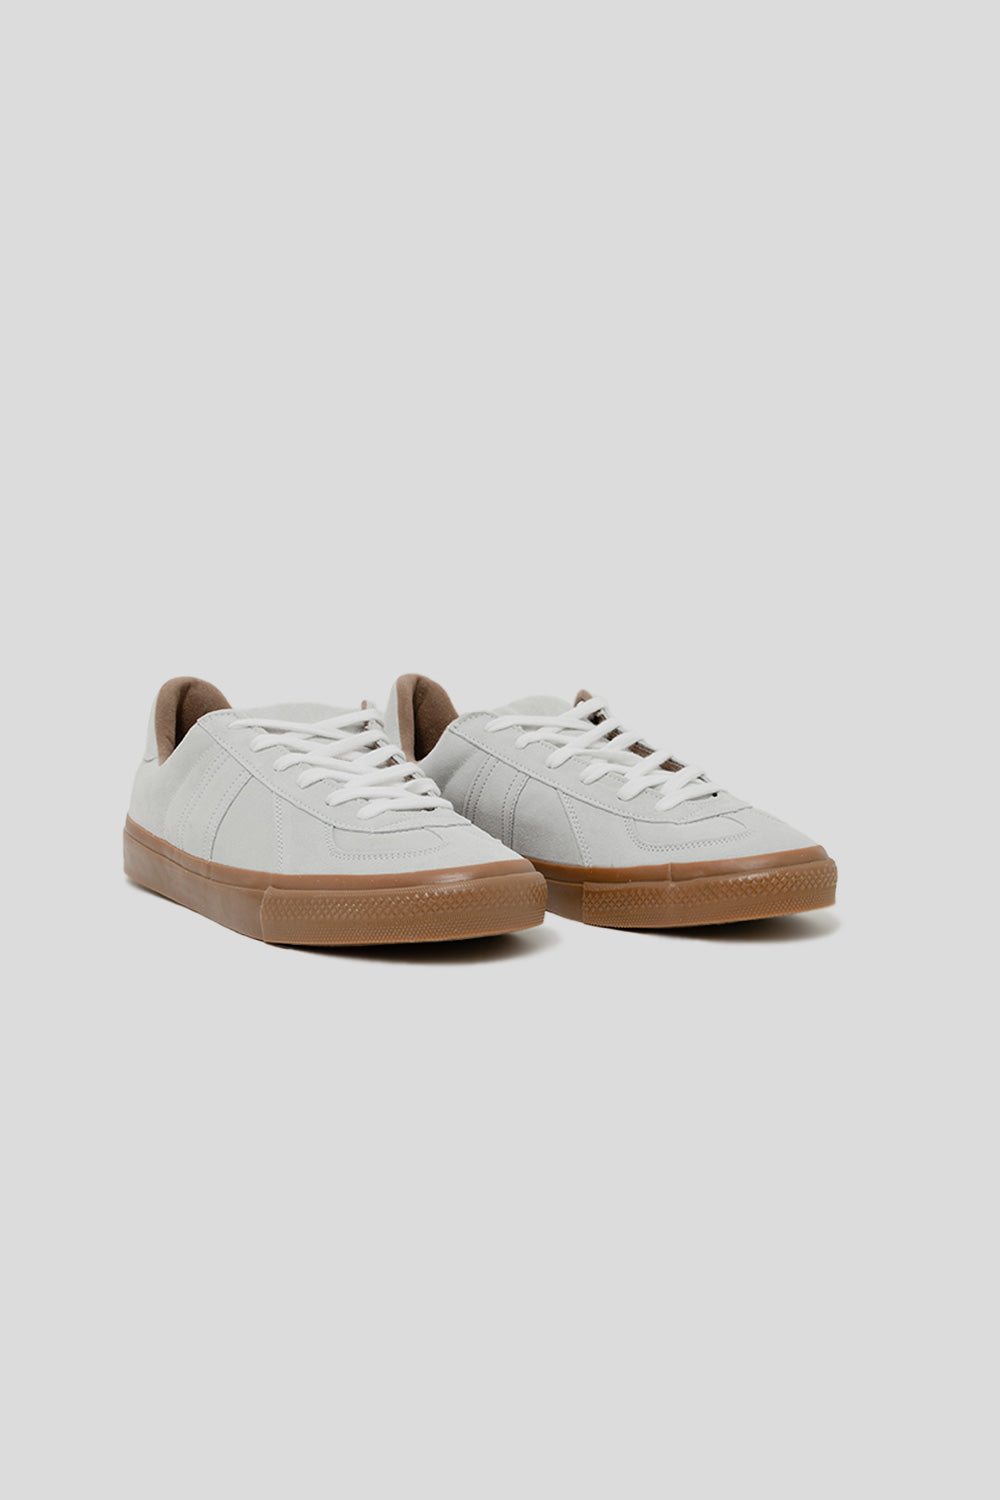 Reproduction of Found German Military Trainer Skateboarding Shoe in White Suede